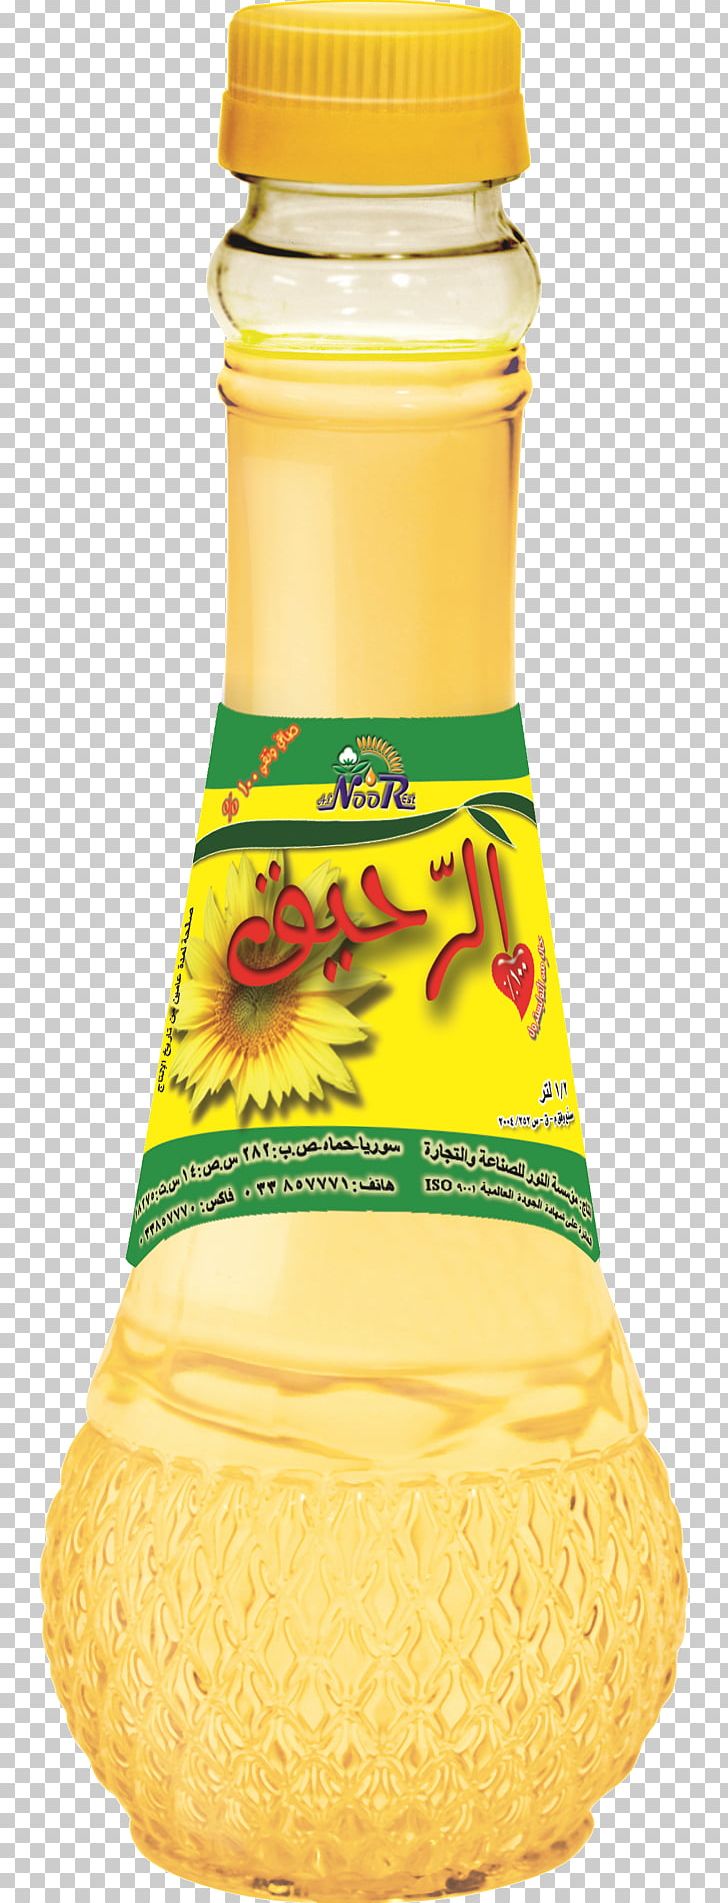 Sunflower Oil Food Baikal Mayonnaise PNG, Clipart, Baikal, Bottle, Clubmate, Drink, Food Free PNG Download